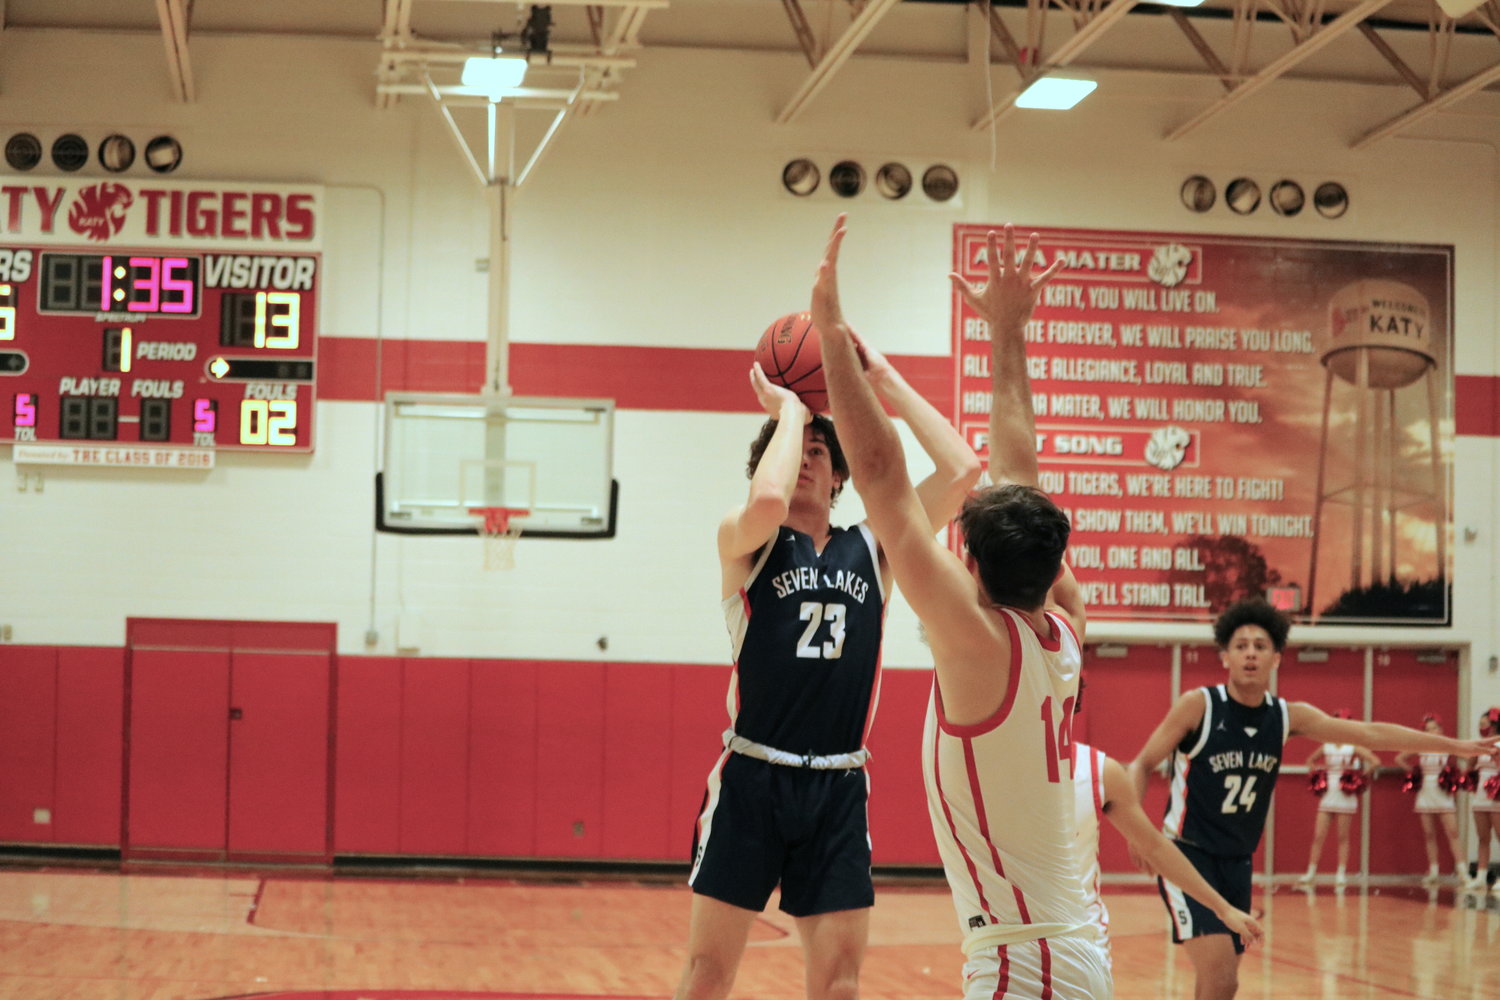 Ethan Van Horn shoots a jump shot during Saturday’s District 19-6A game between Seven Lakes and Katy at the Katy gym.